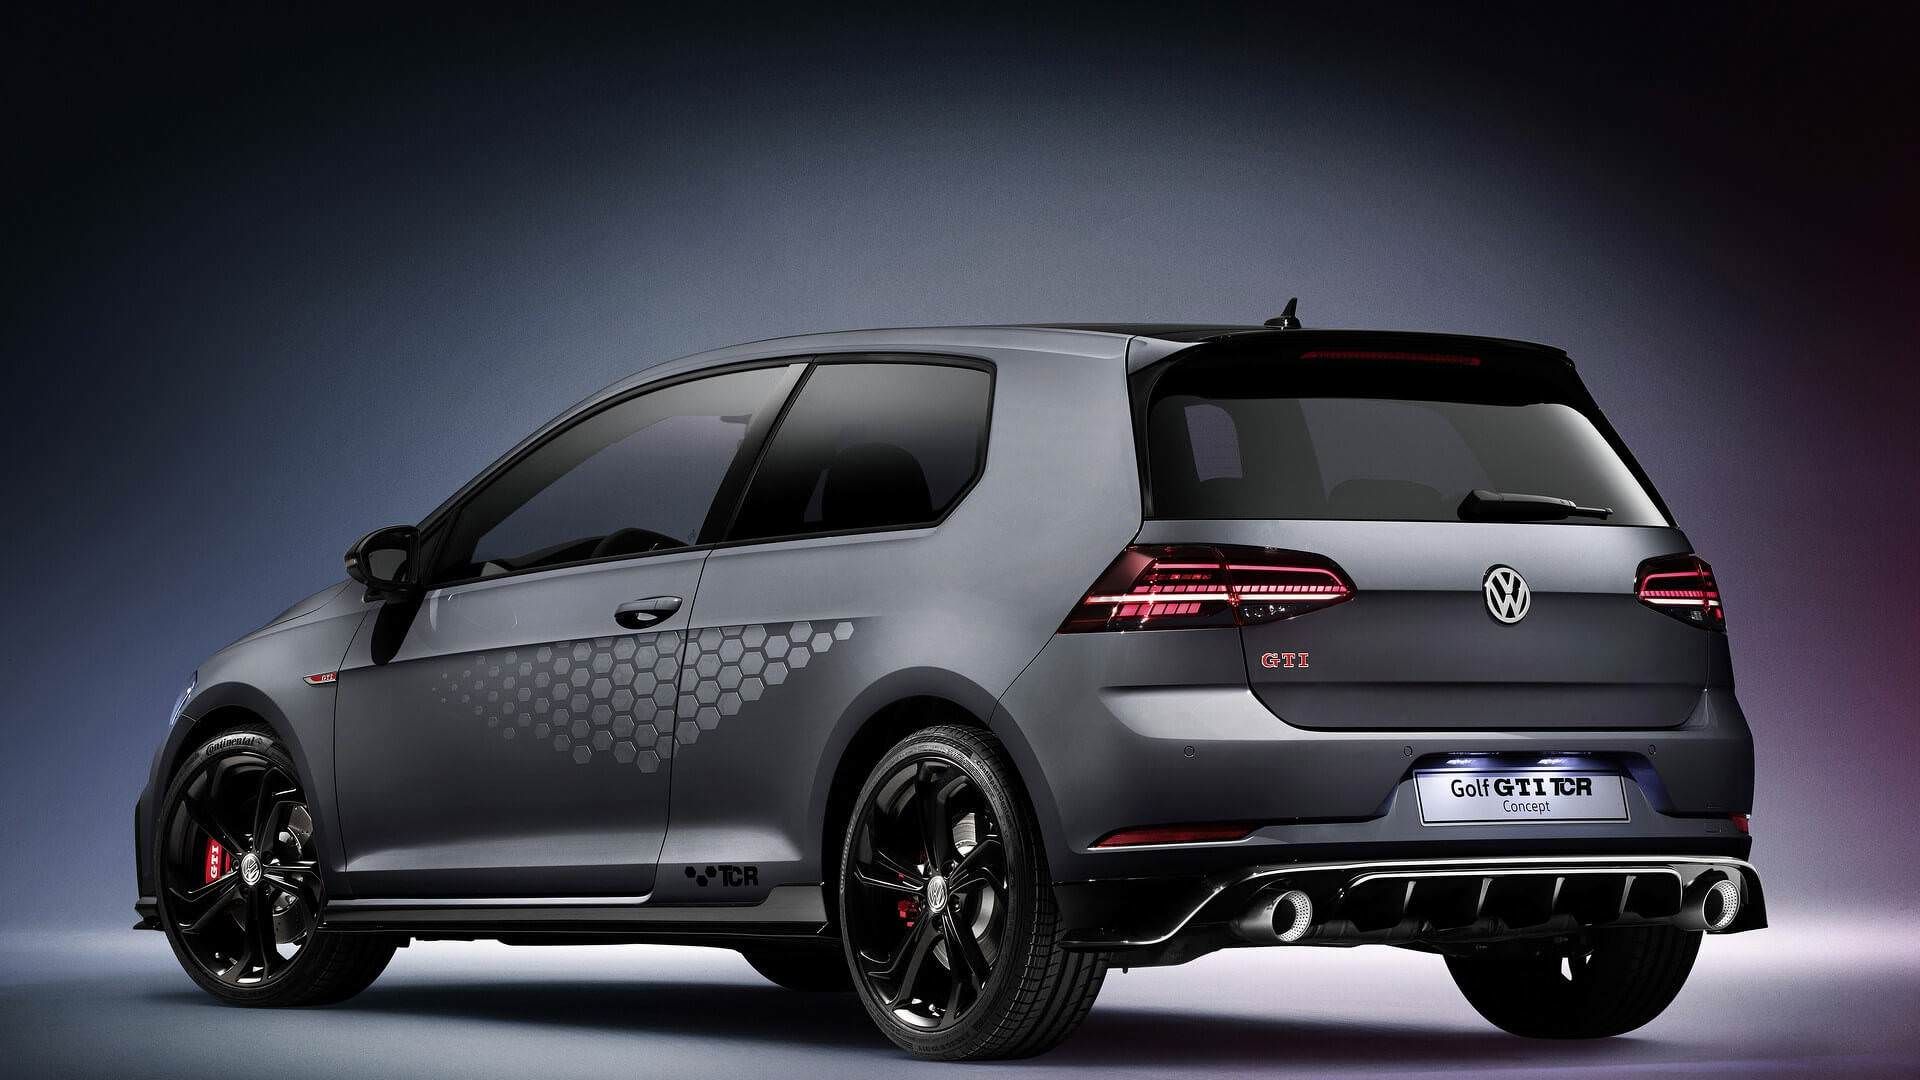 Volkswagen Golf GTI TCR Concept / خودروی مفهومی فولکس‌واگن گلف GTI TCR